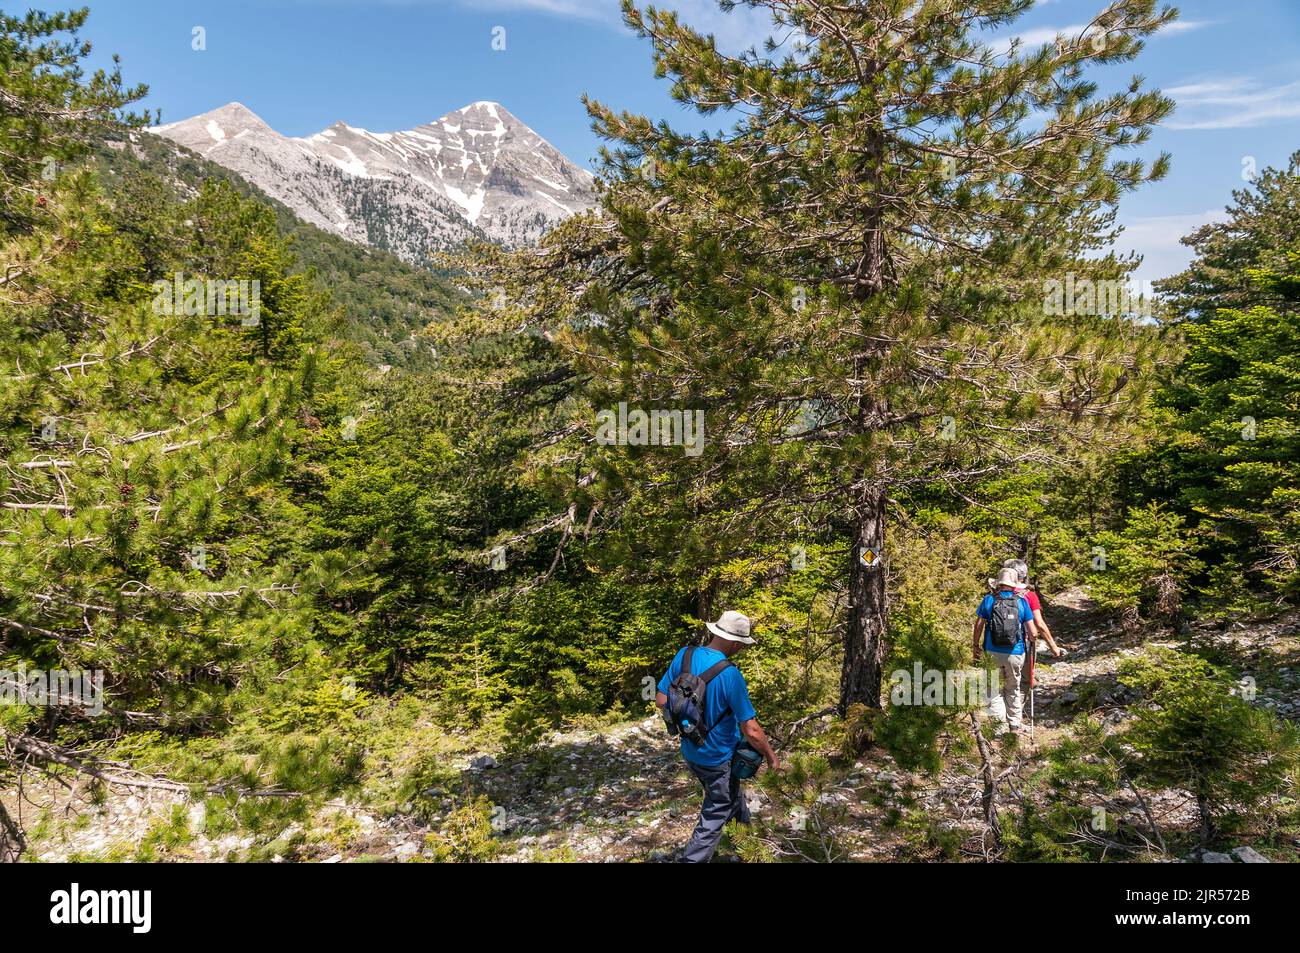 Walking in the Vasiliki Forest on the long distance,  E4 route with The peak of Profitis Ilias in the background, The highest peak in the Taygetus ran Stock Photo